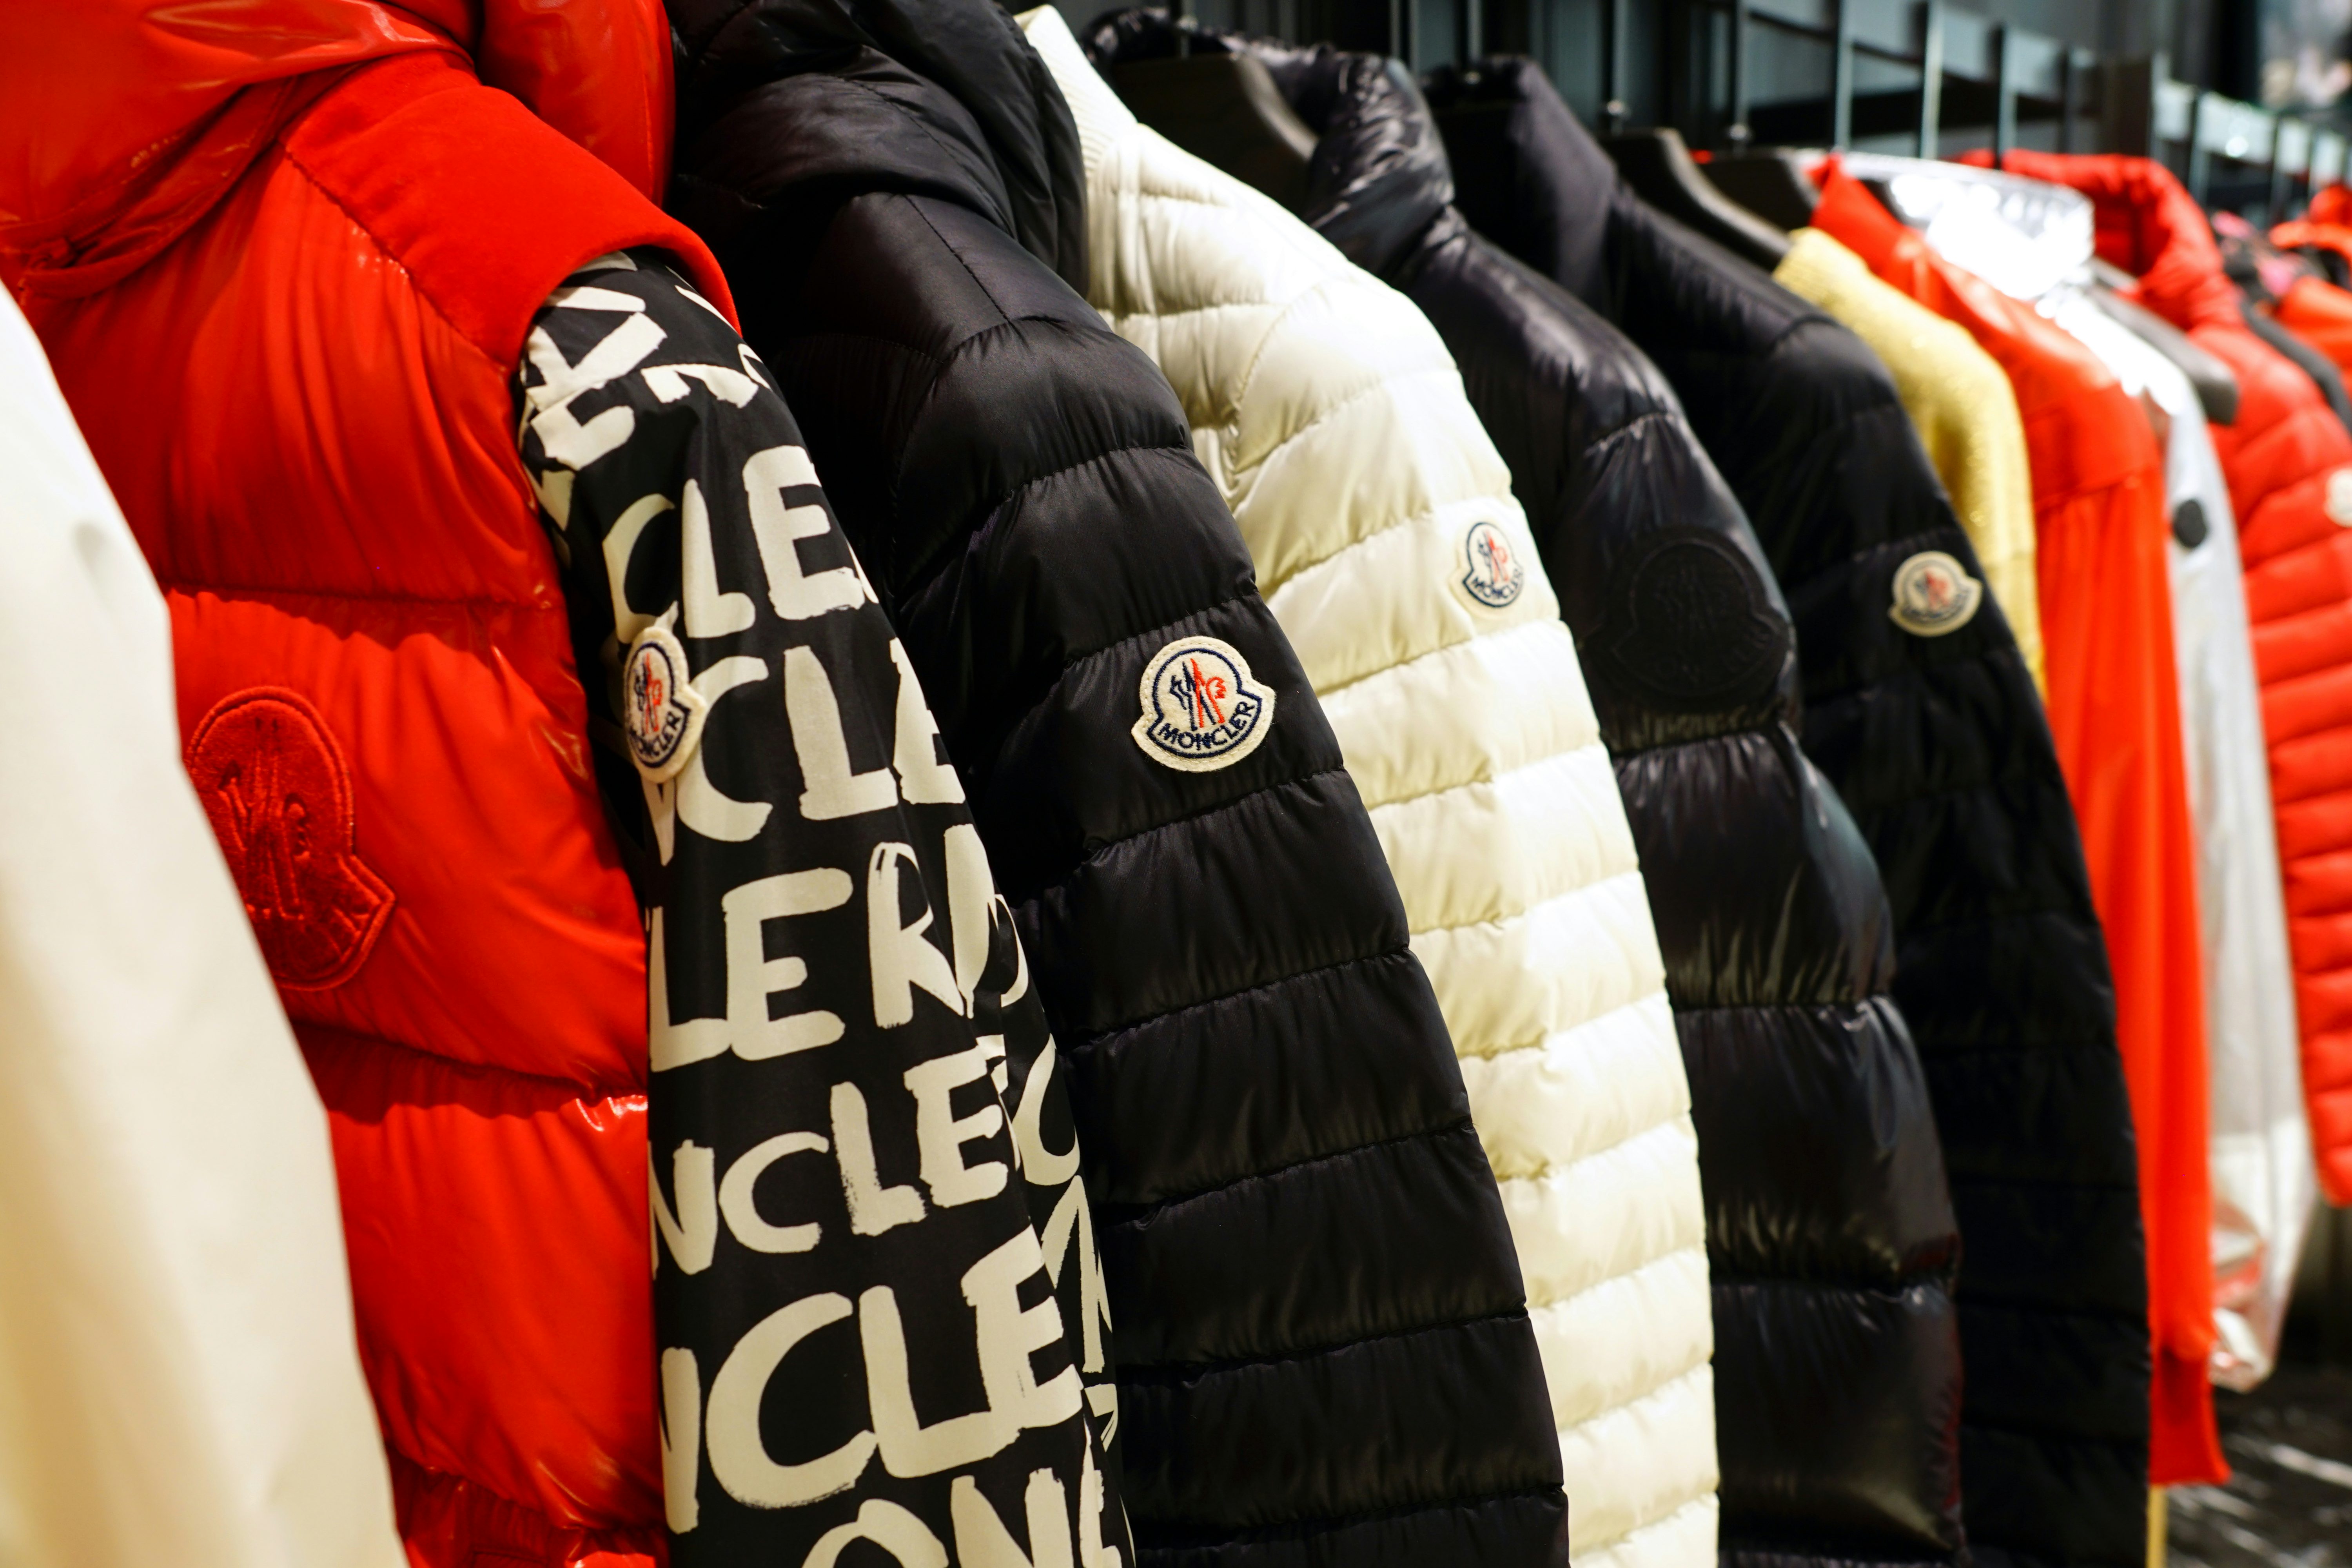 moncler which country brand